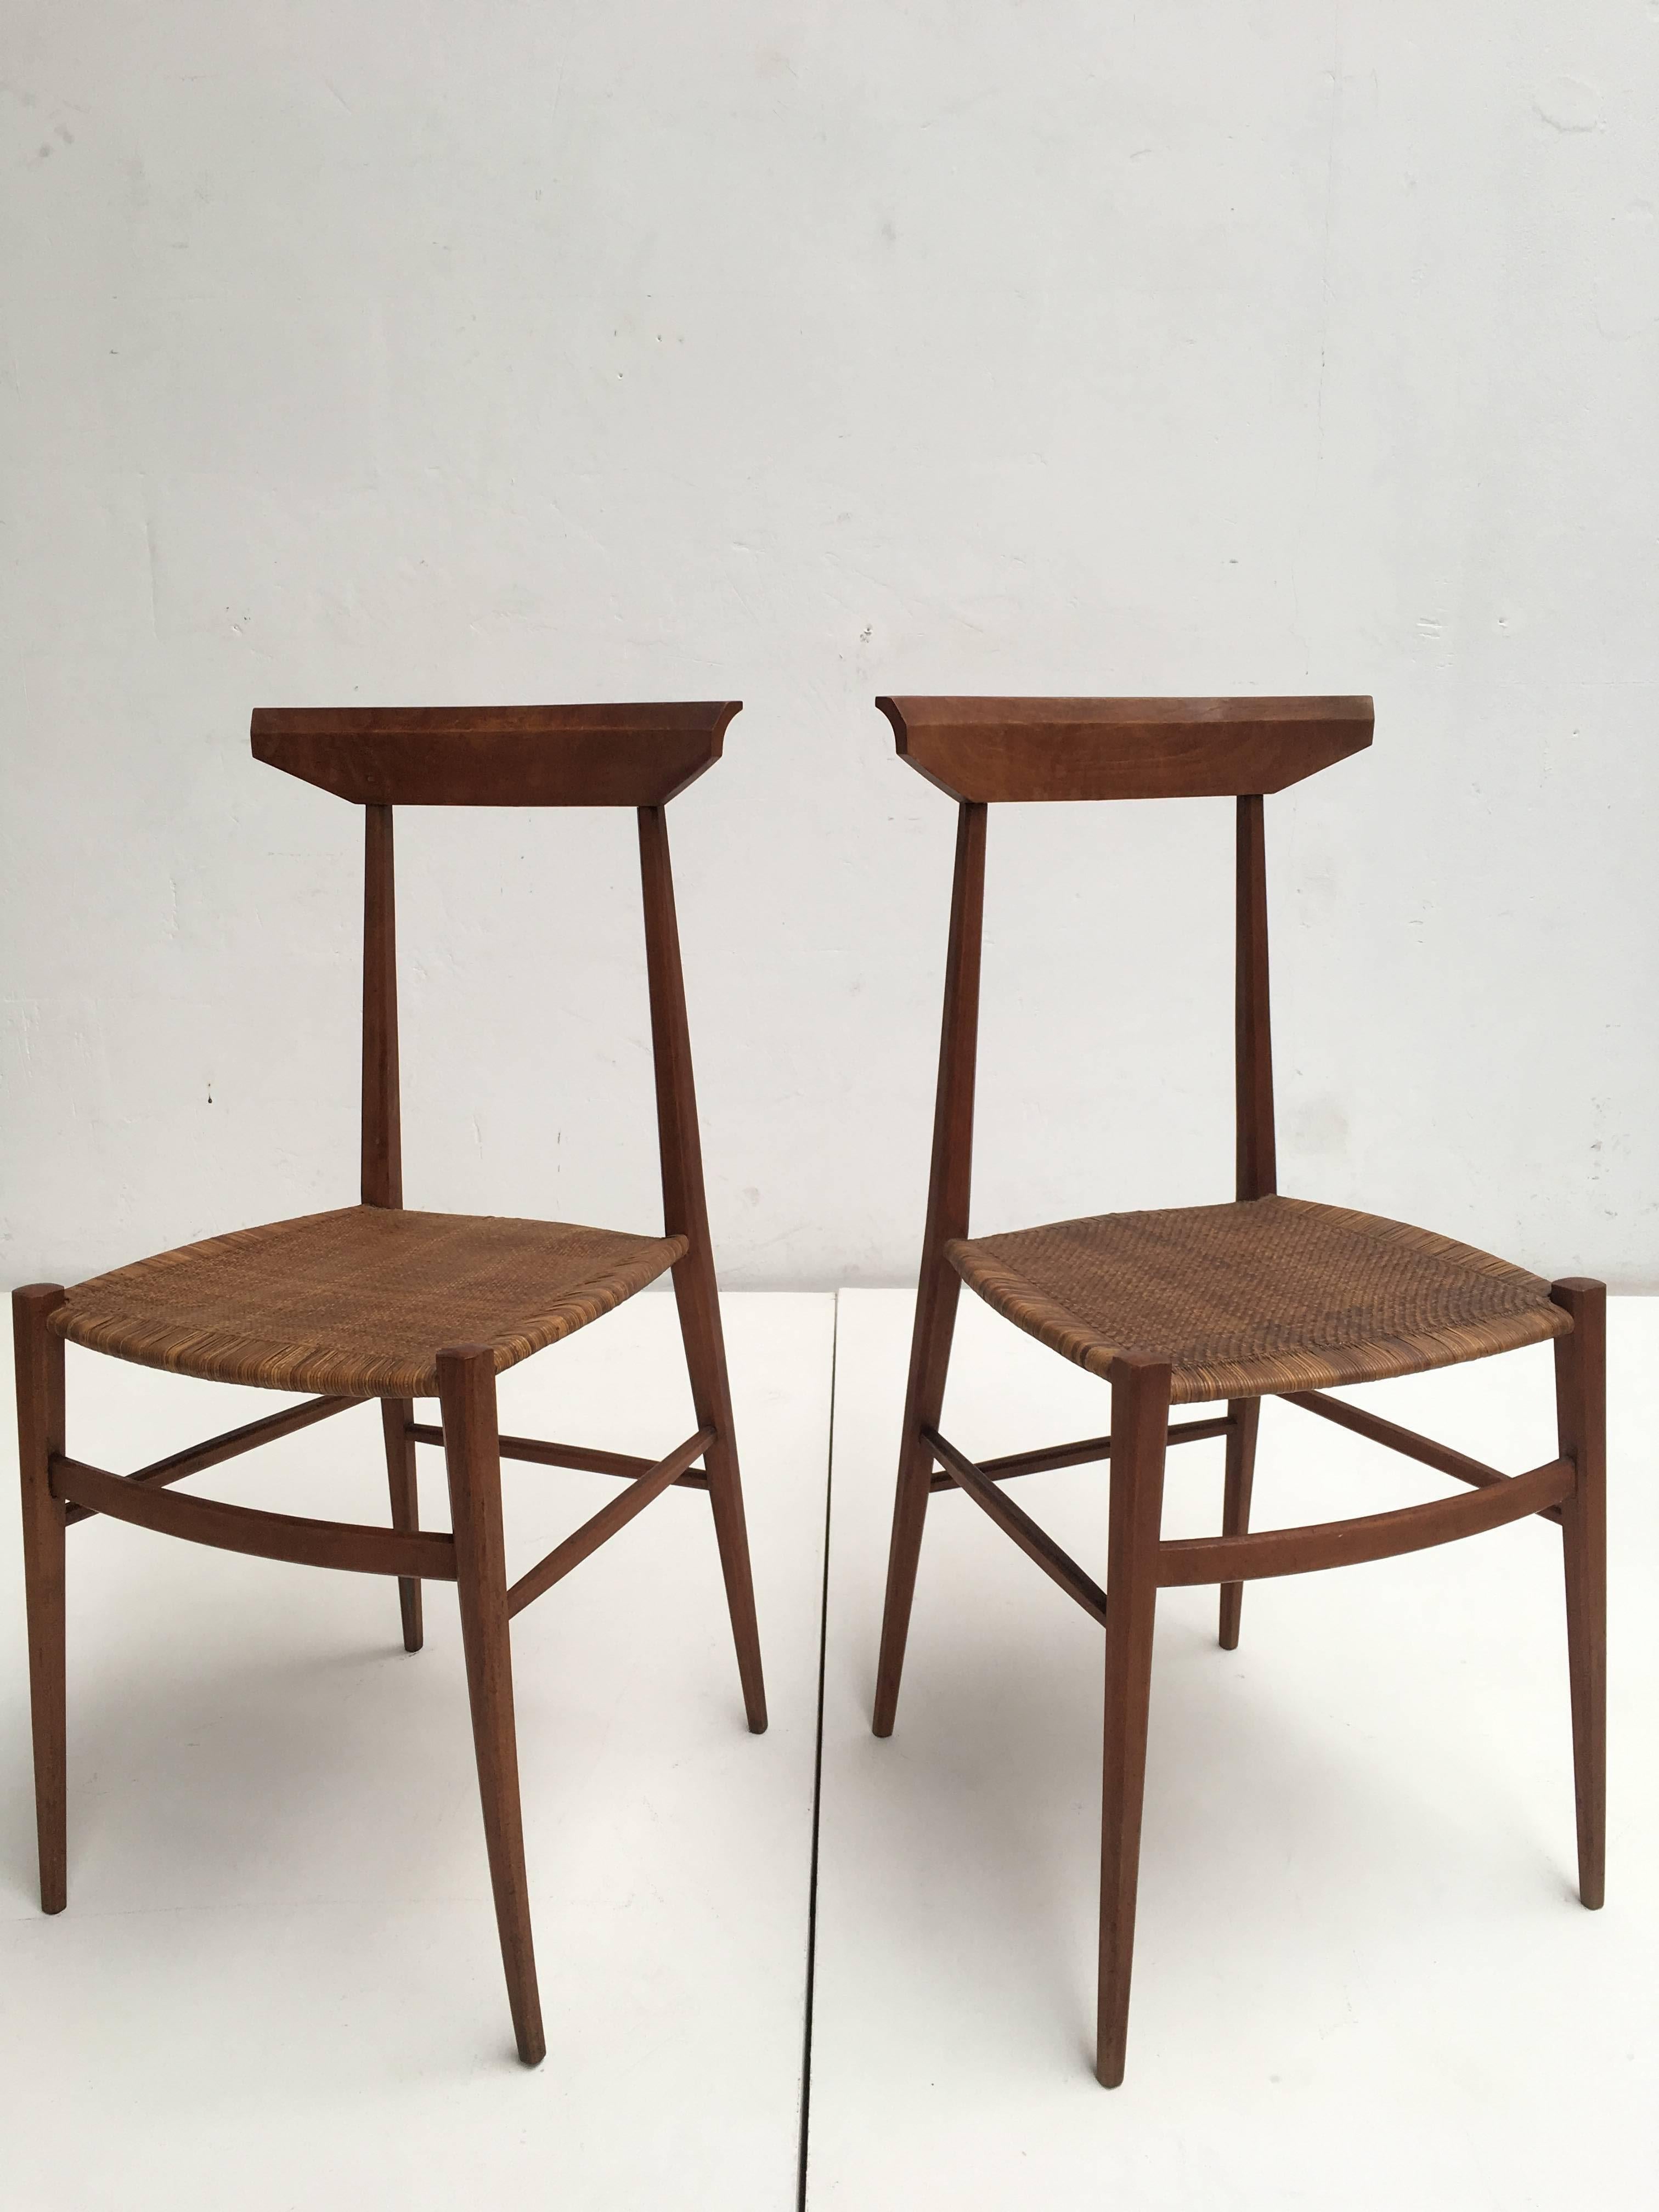 Hand-Carved Pair of 1950s Gio Ponti Influenced Modernist Chiavari Side Chairs